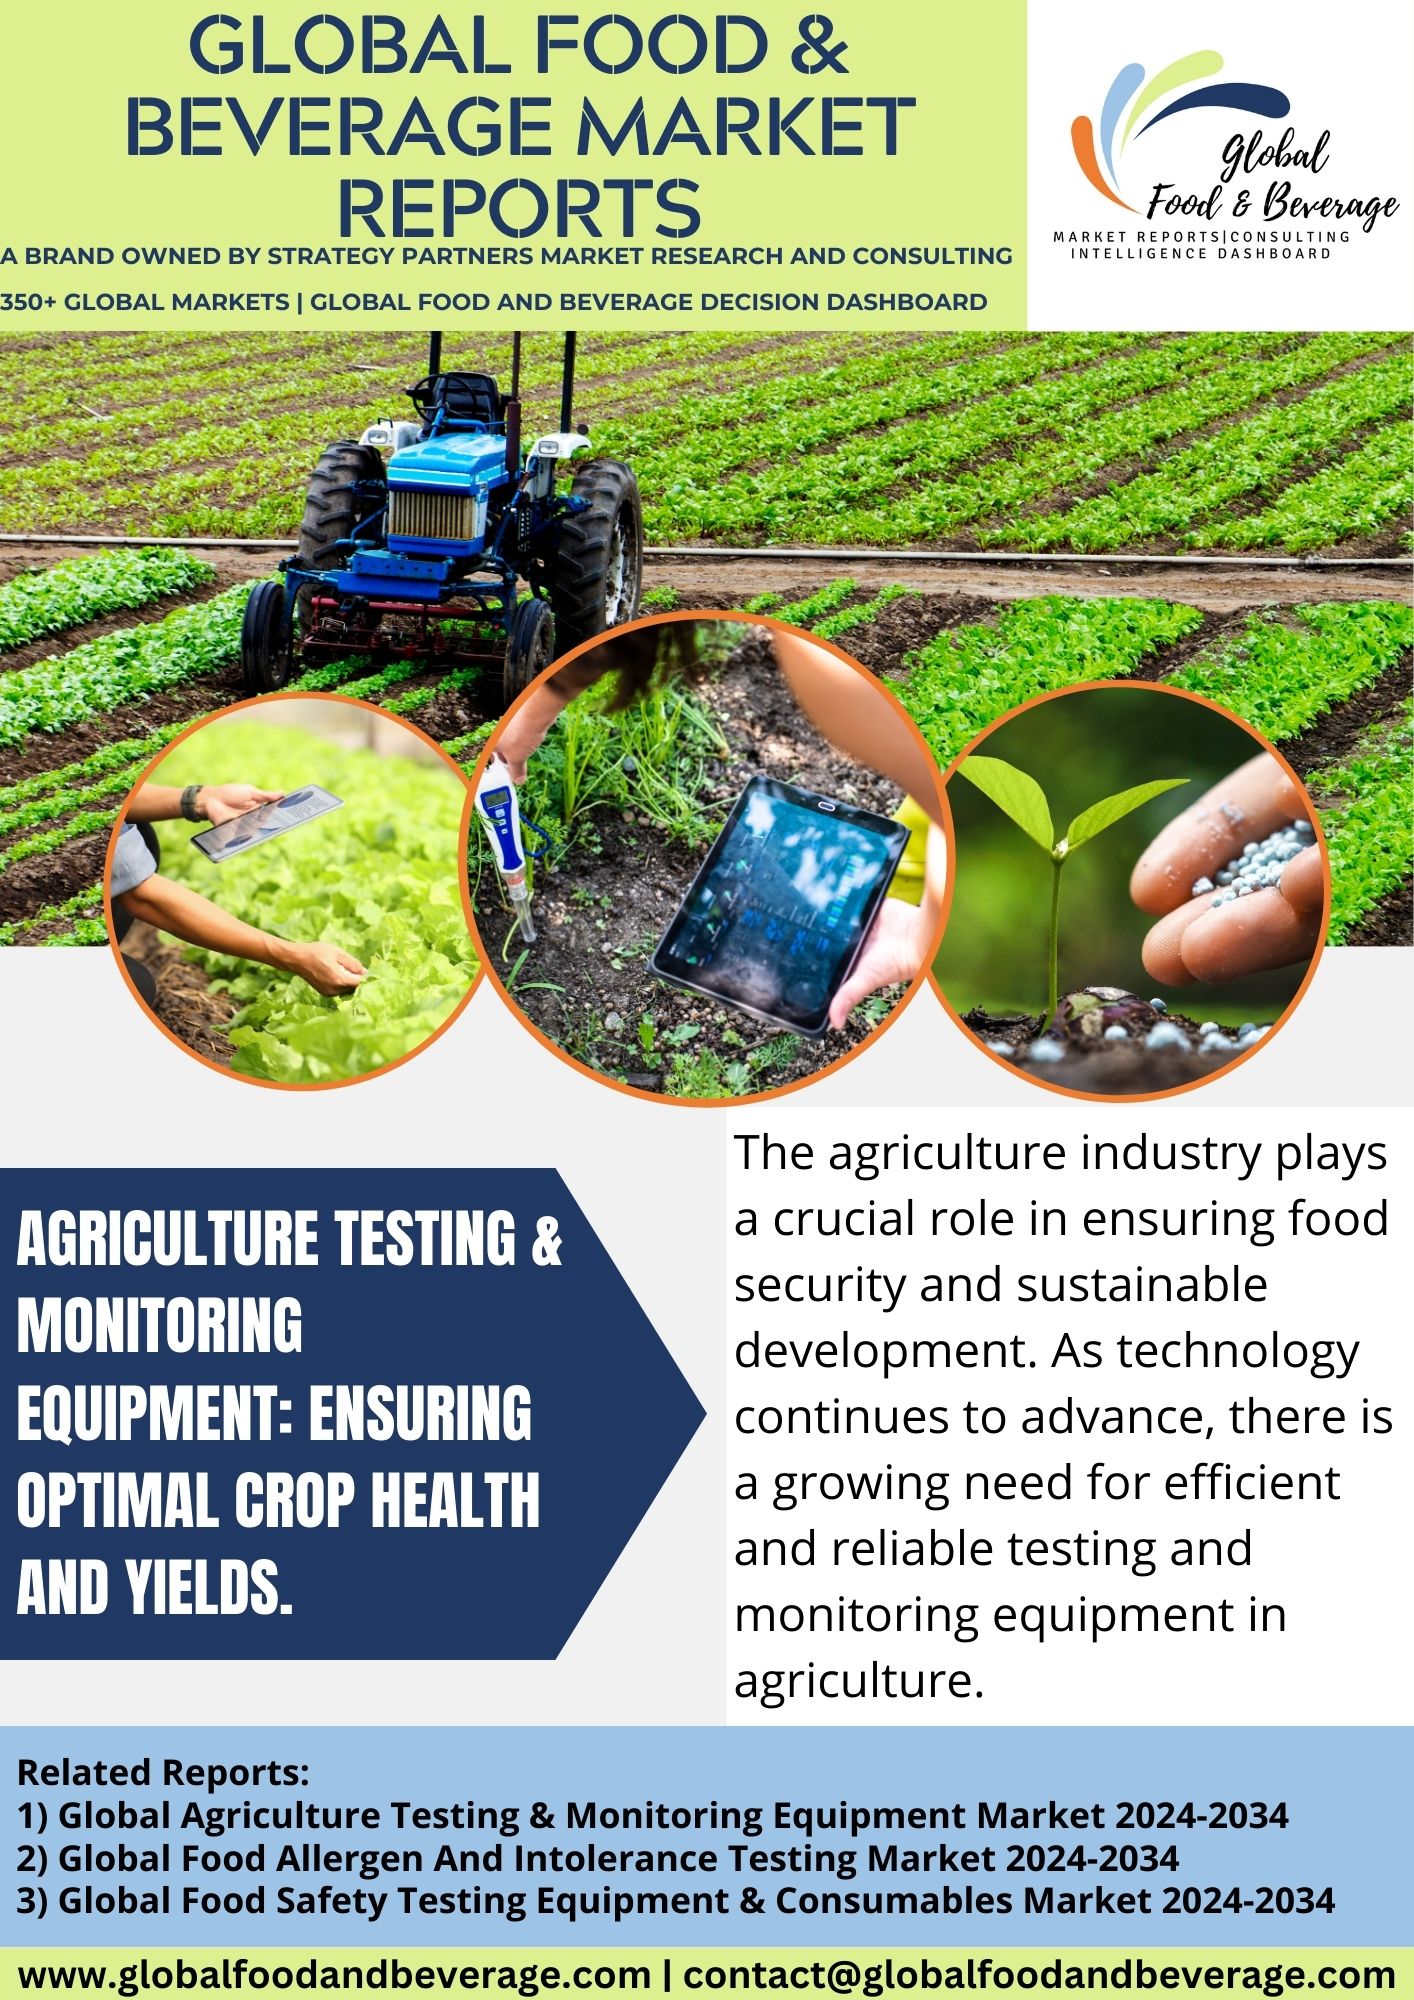 Agriculture Testing & Monitoring Equipment